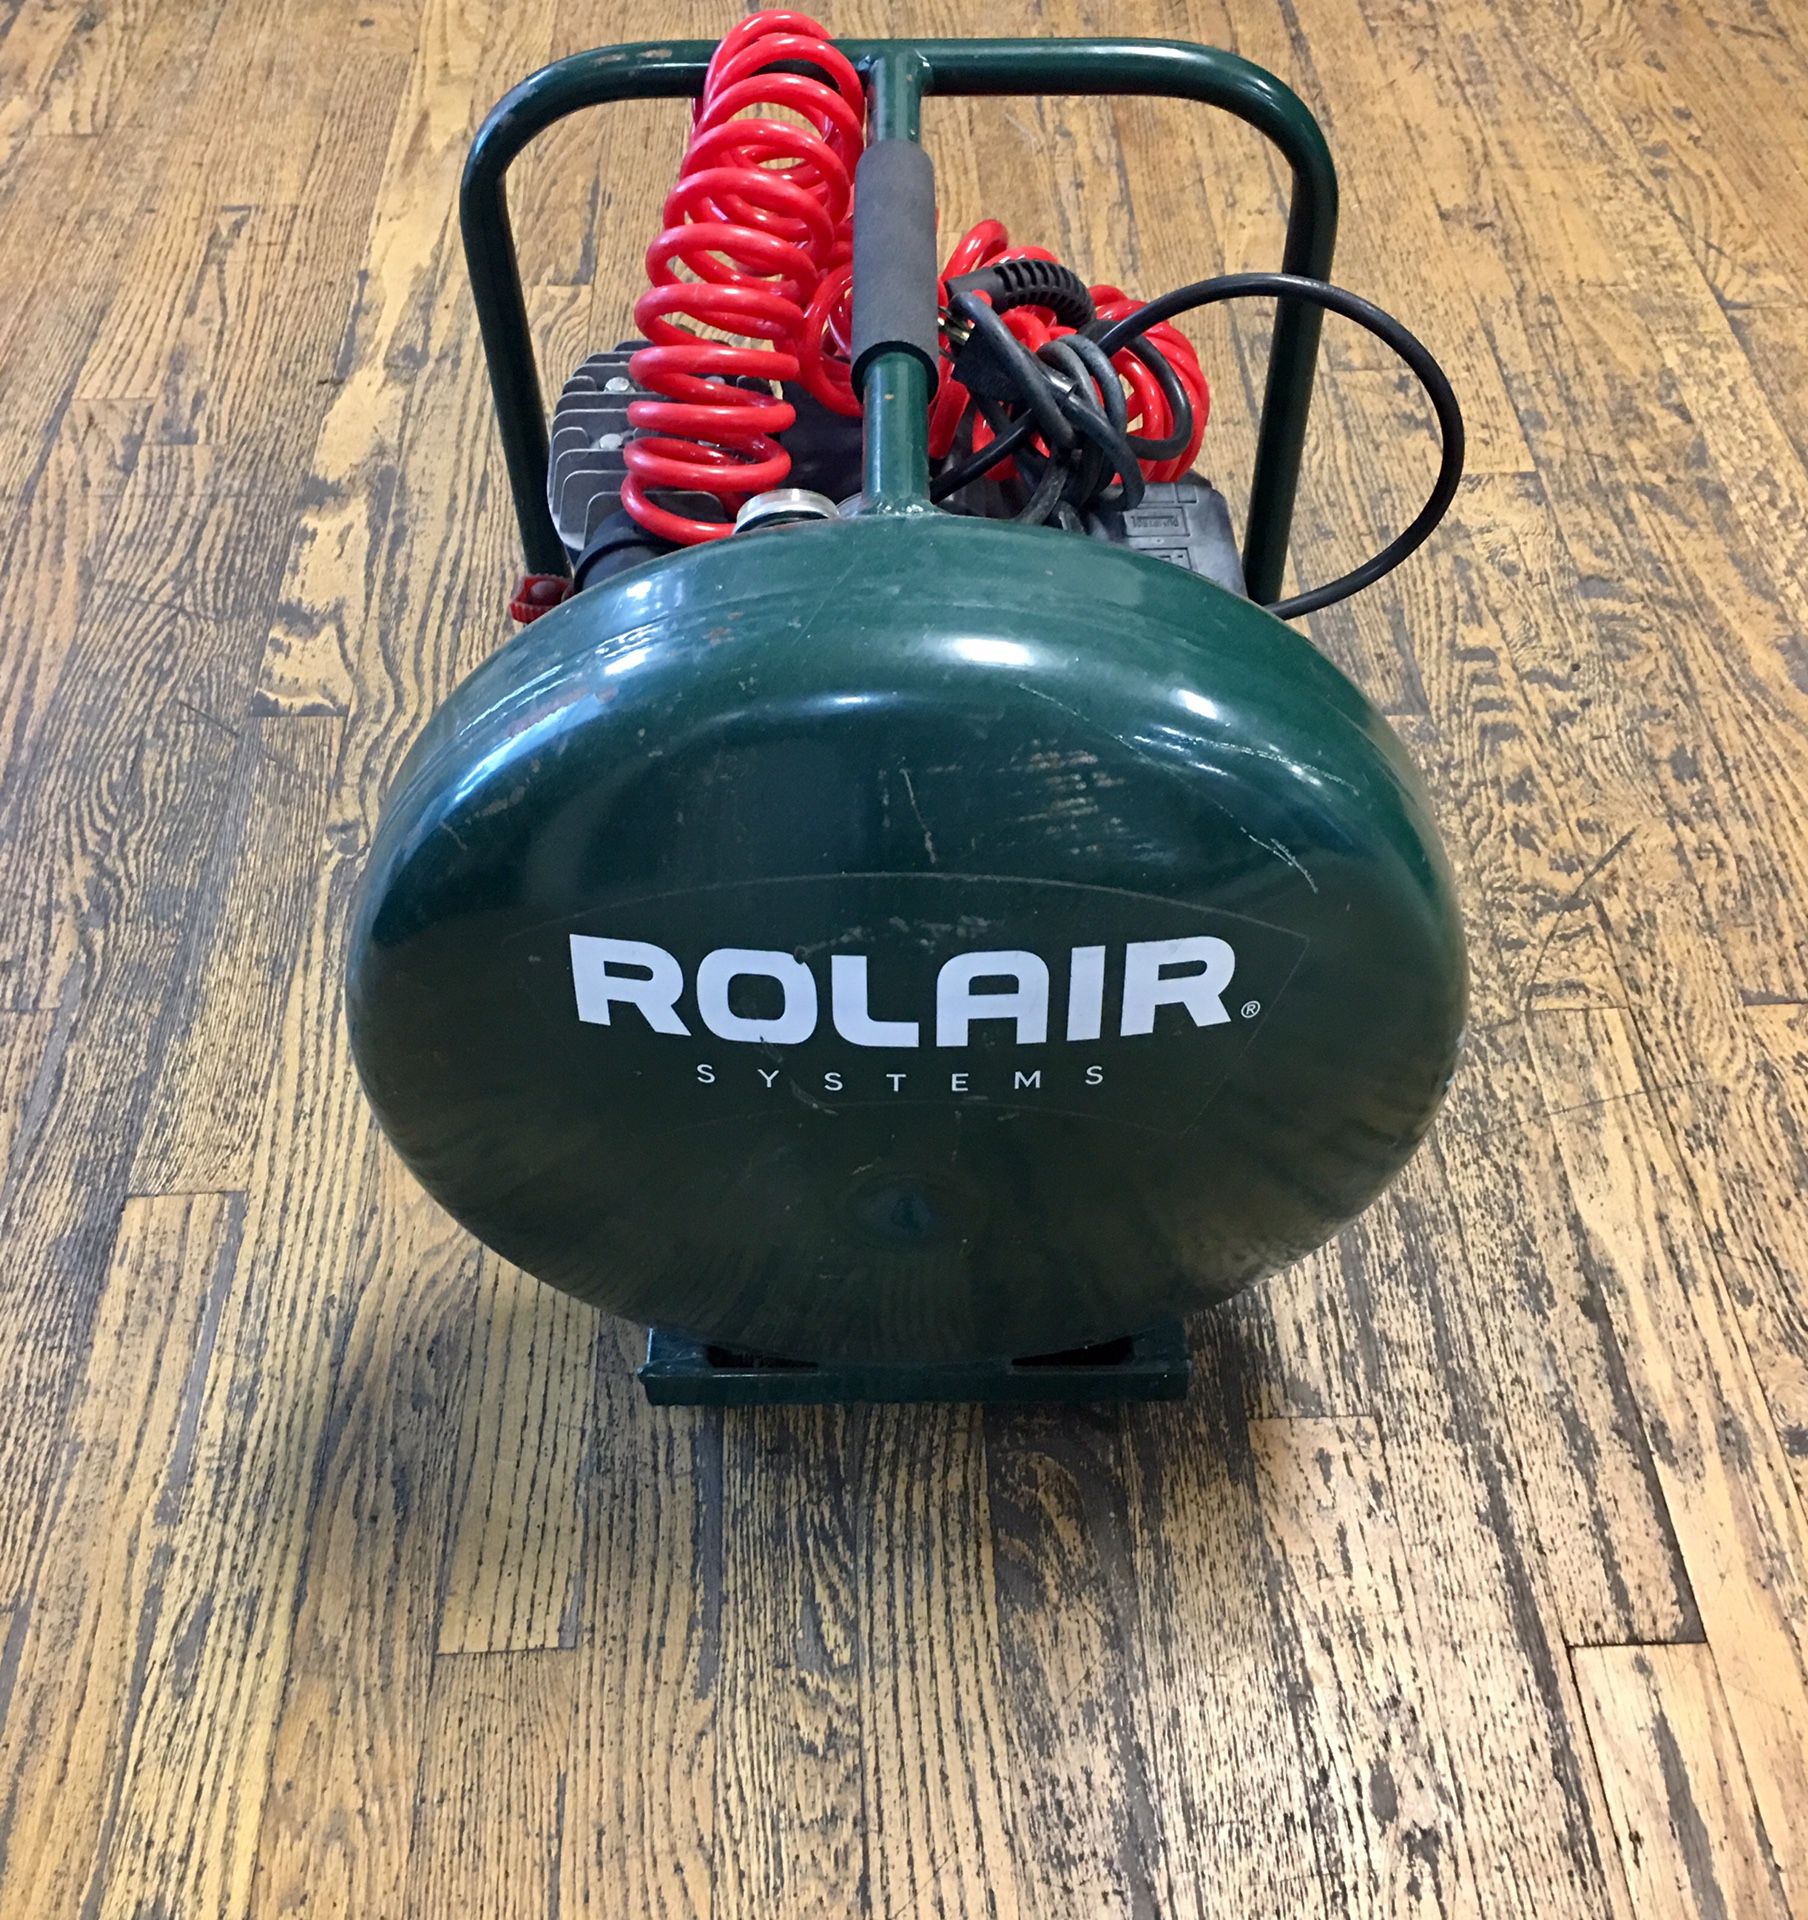 ROLAIR 2HP 4.5 GAL SINGLE STAGE AIR COMPRESSOR MODEL D2002HPV5